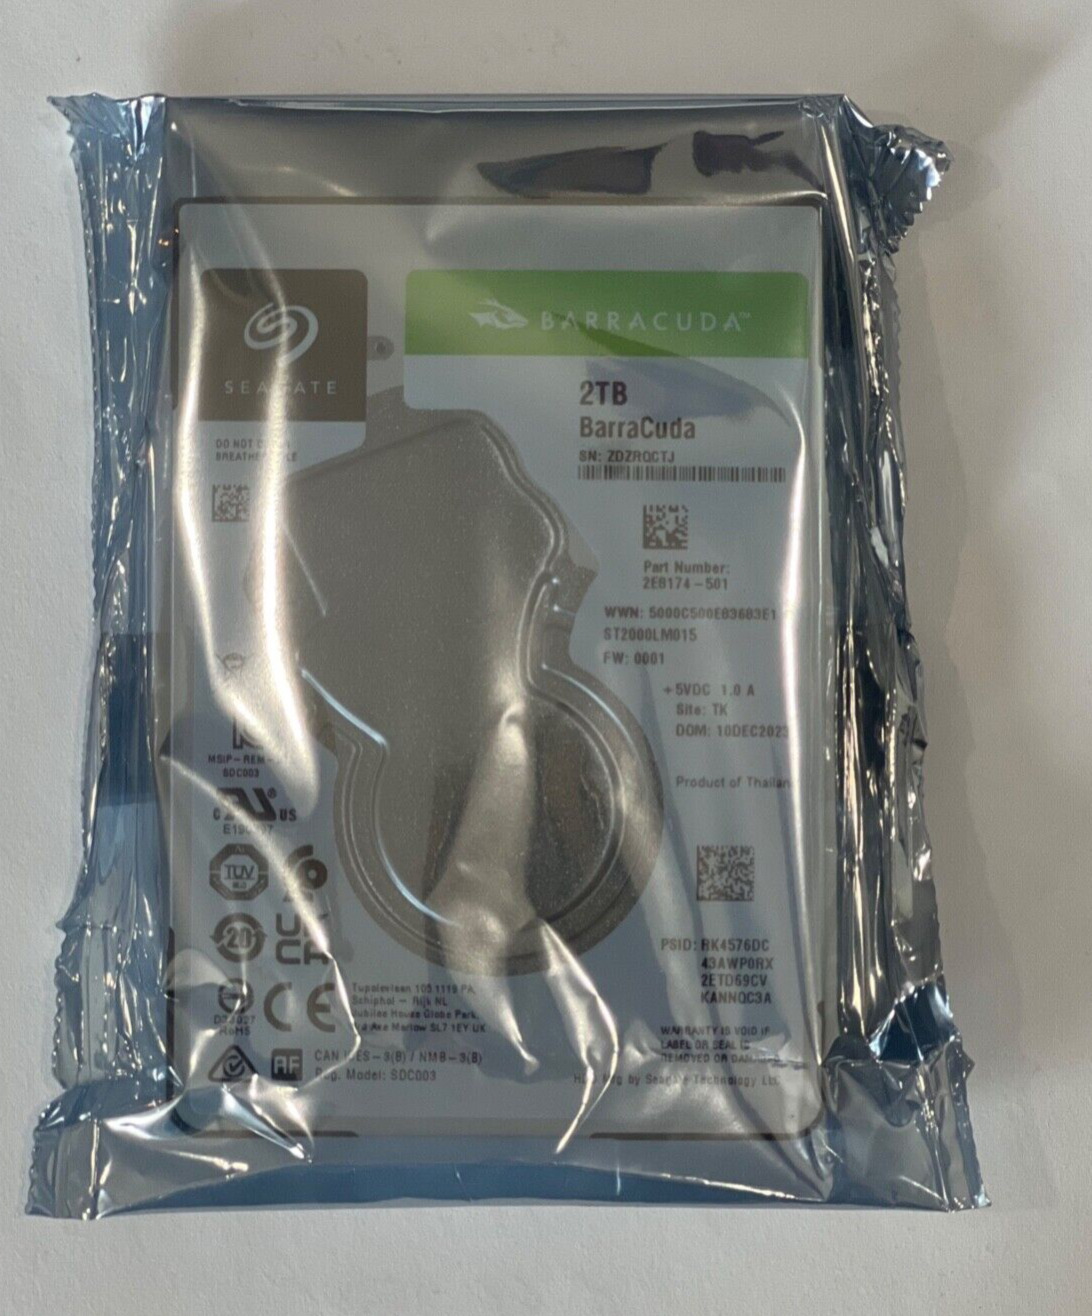 FACTORY SEALED SEAGATE ST2000LM015 2TB 2.5